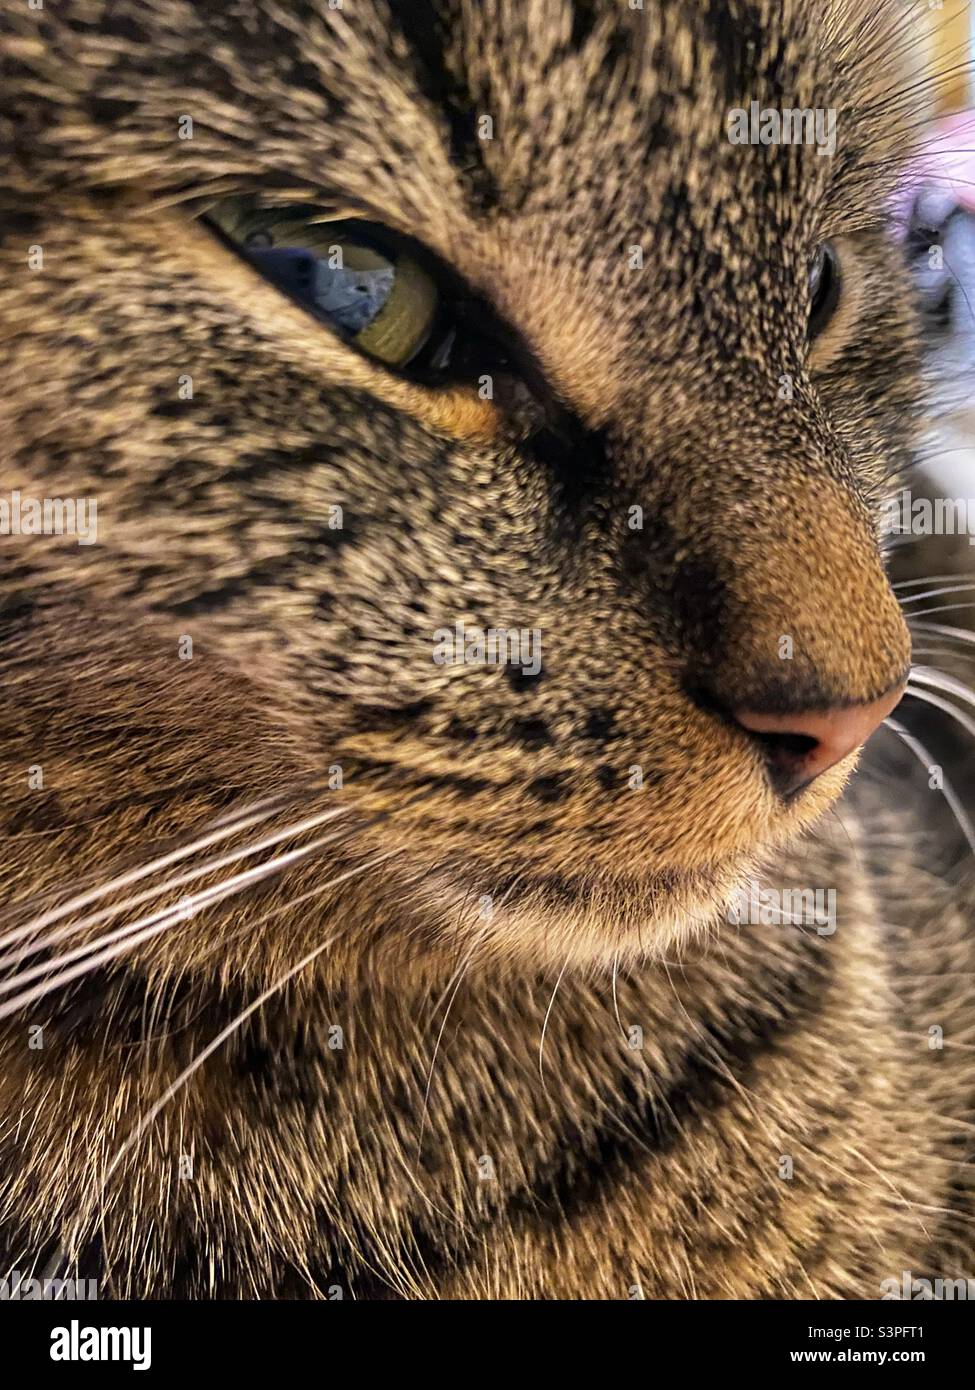 Close up of Tabby cat’s face and whiskers Stock Photo